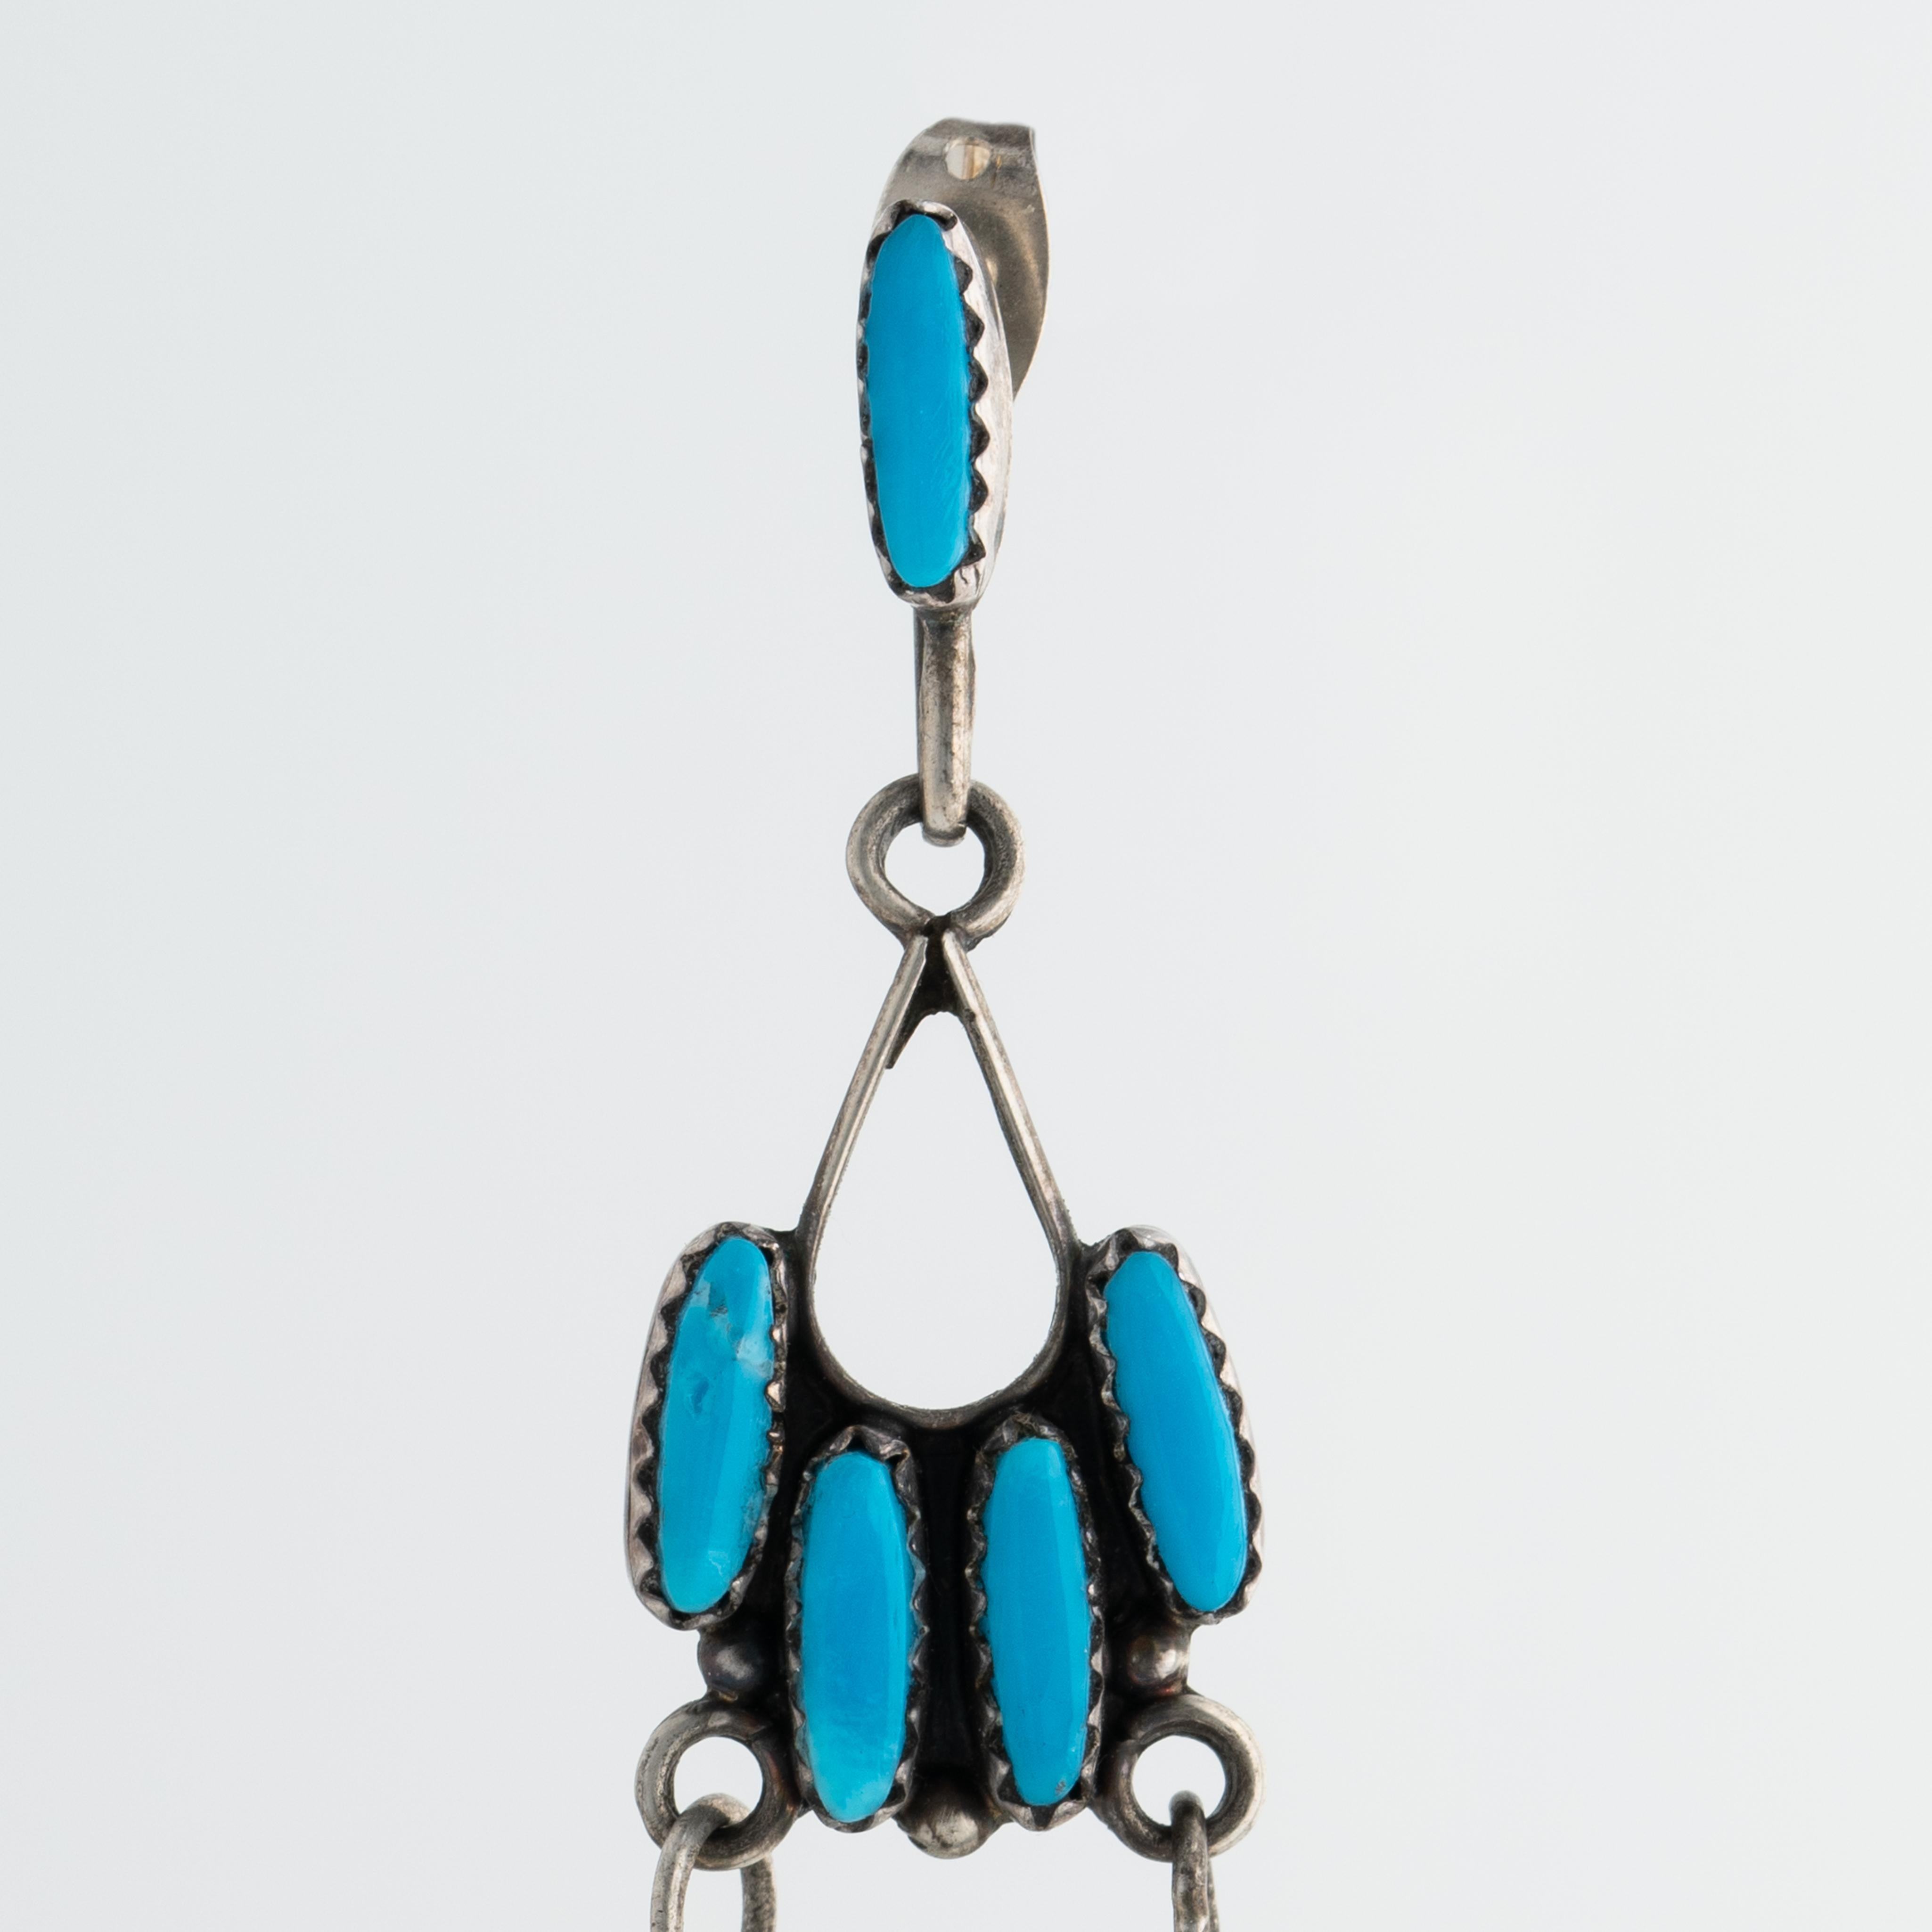 Vintage Native American Zuni Long Silver and Turquoise Chandelier Earrings c.1970s

Weight for each earring: 8.2 grams
Length: 3.34